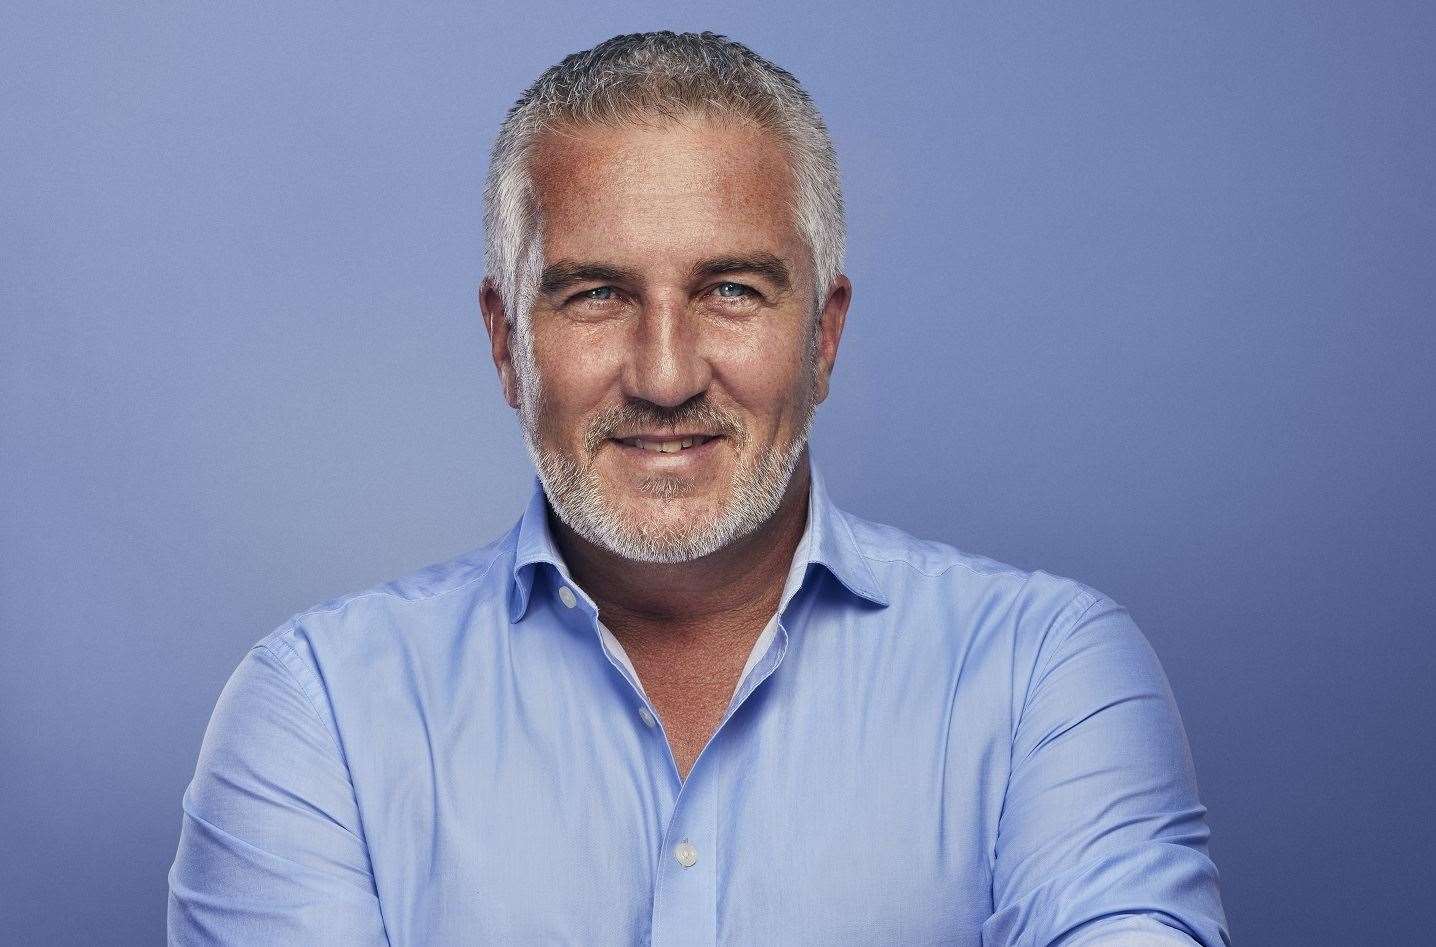 Paul Hollywood lives in a Grade II-listed home. Picture: Michael Wharley